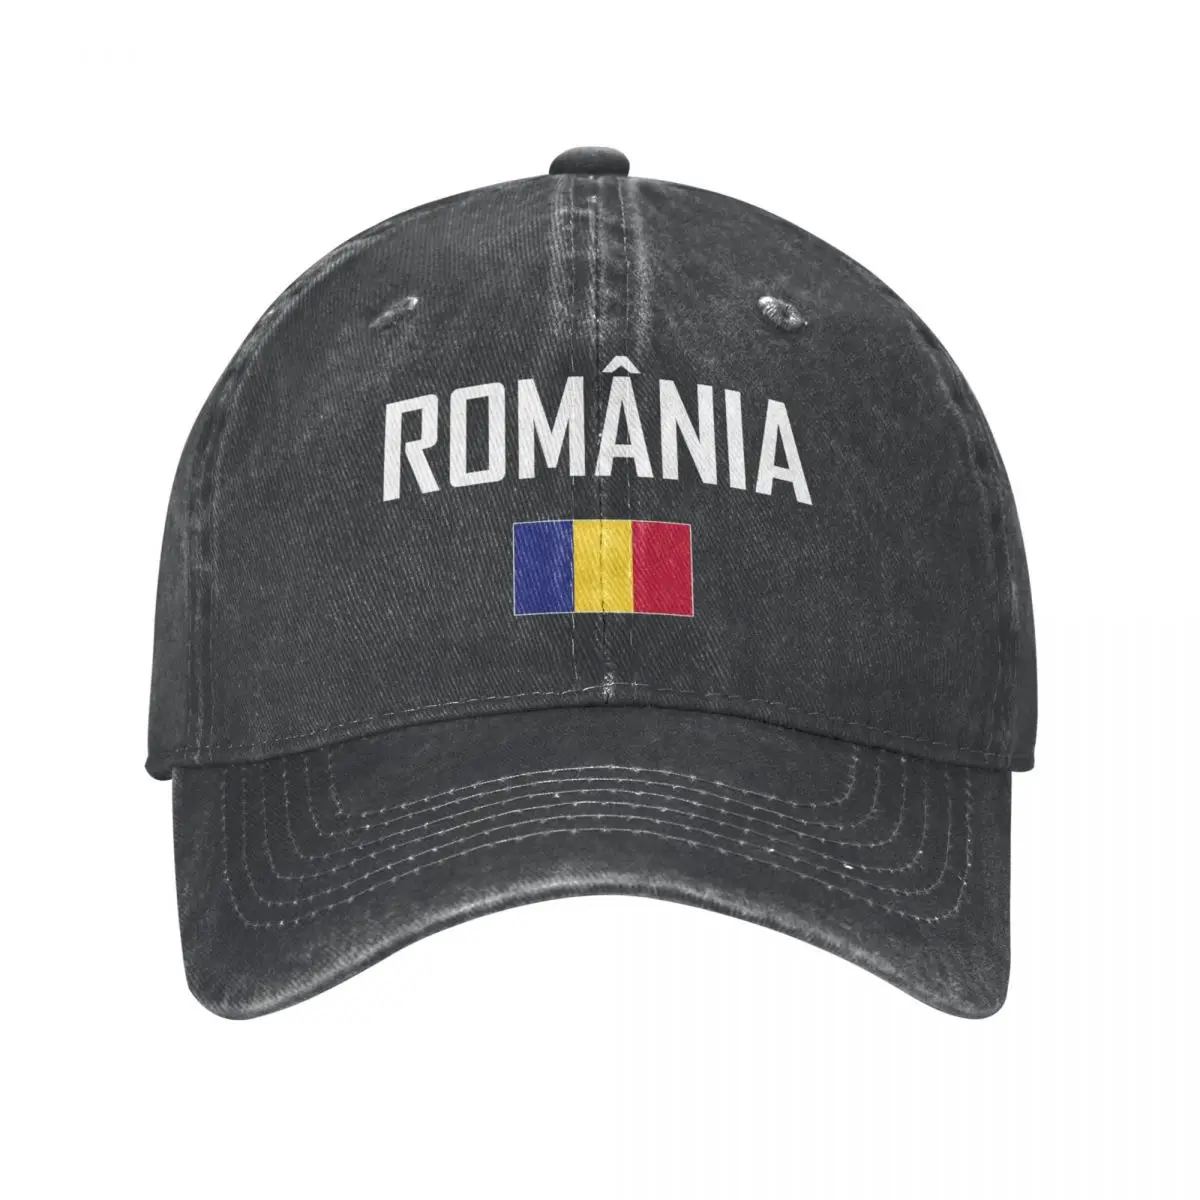 

Men Baseball Cap Romania Flag And Font Charcoal Washed Denim Classic Vintage Cotton Dad Trucker Hat Unisex Adult